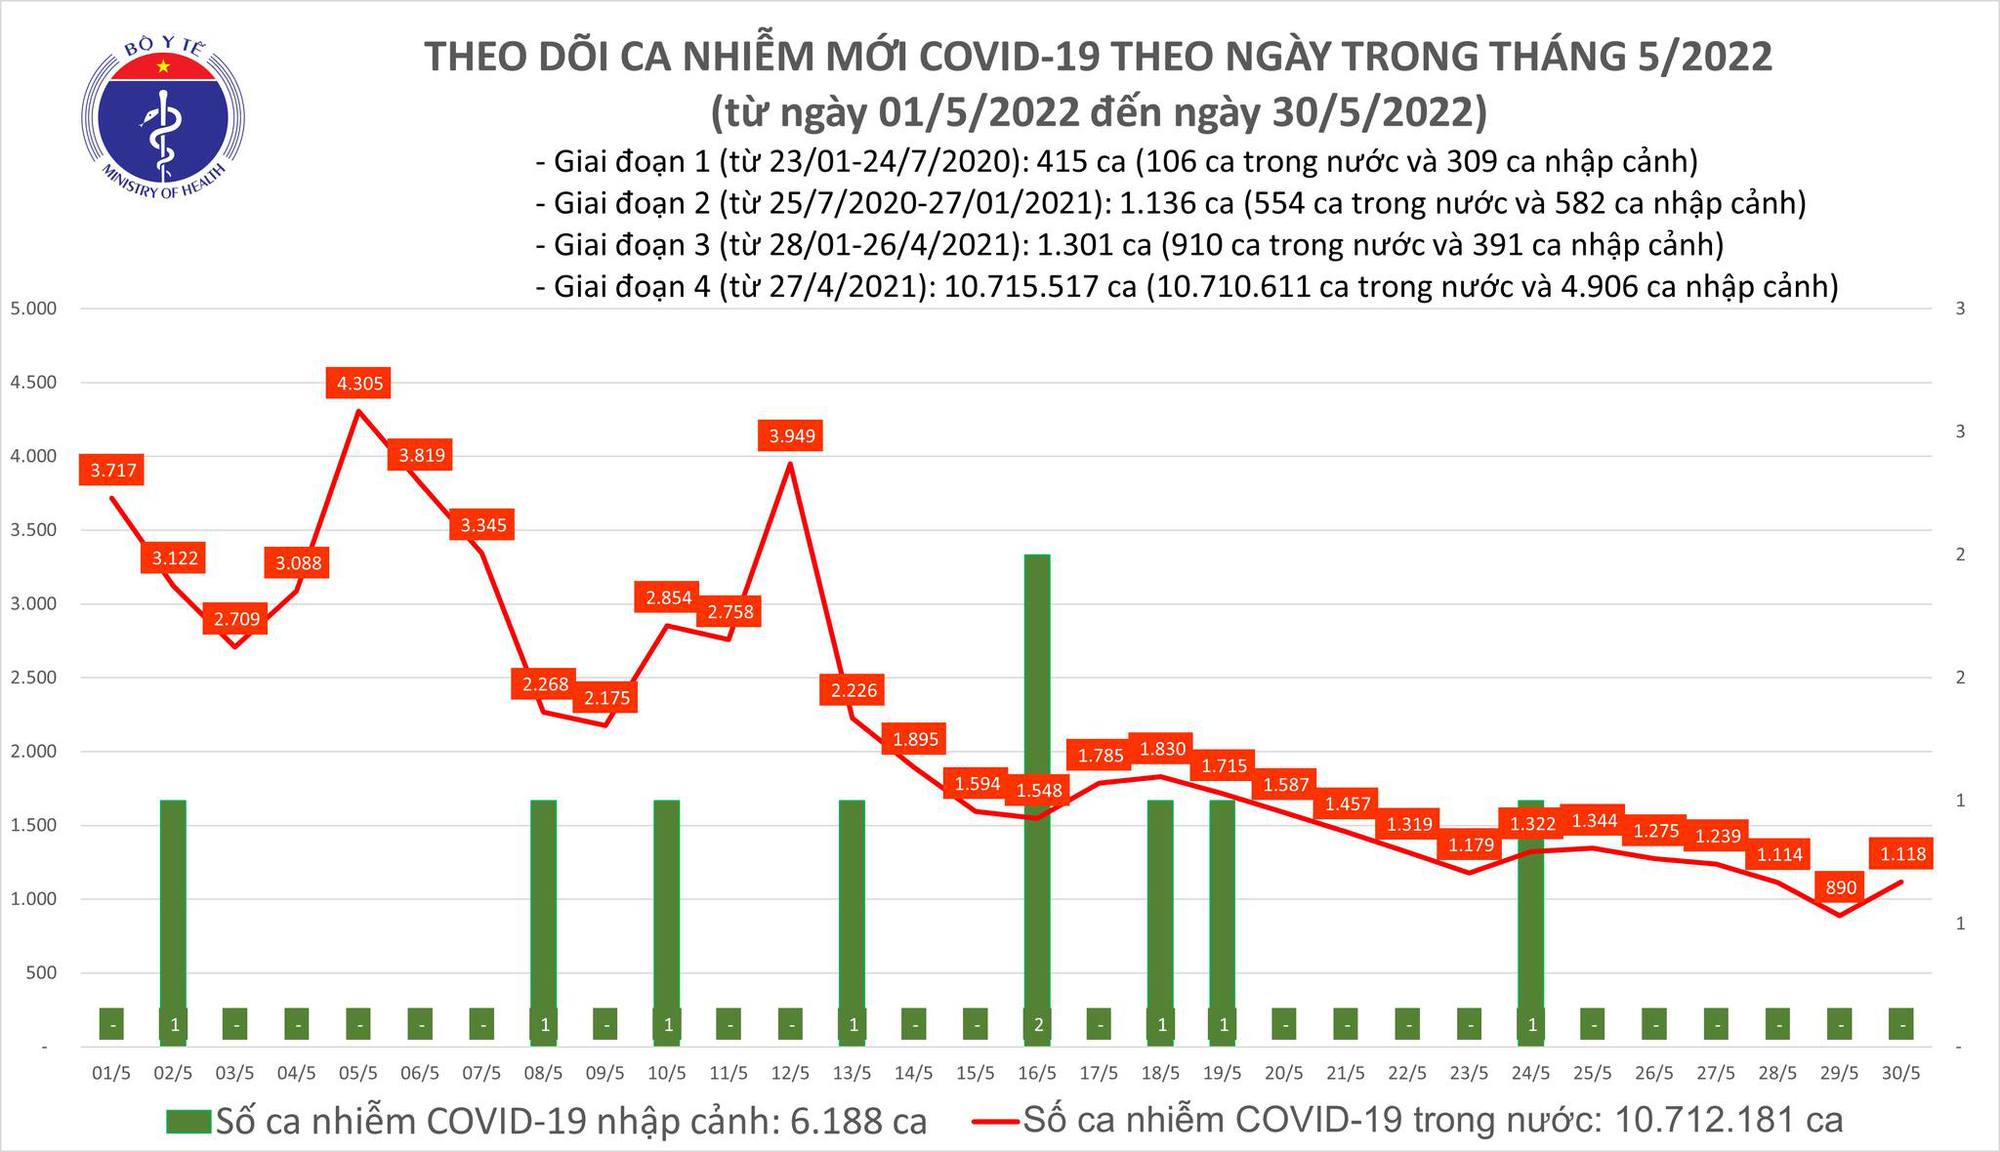 Covid-19 on May 30: 1,100 new Covid-19 cases, no deaths were recorded - Photo 1.